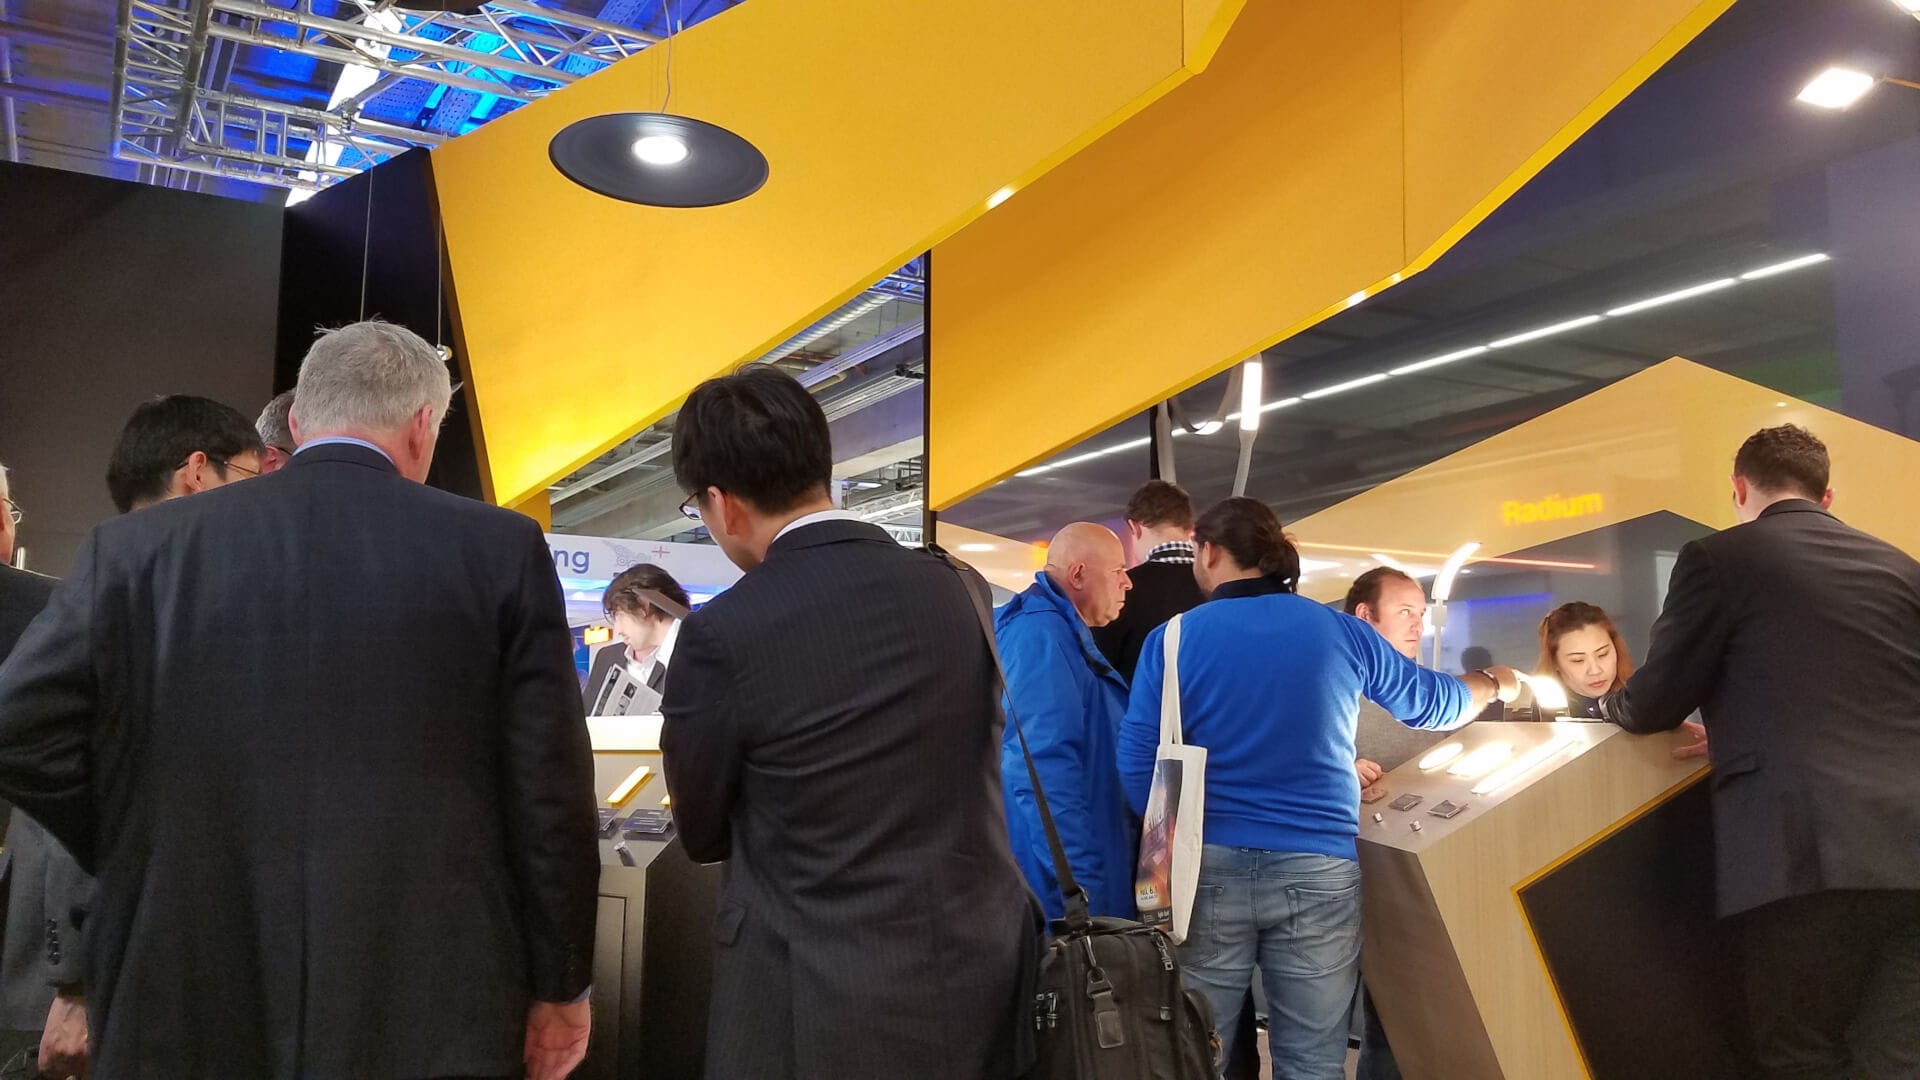 crowded OLEDWorks booth at Light + Building 2018